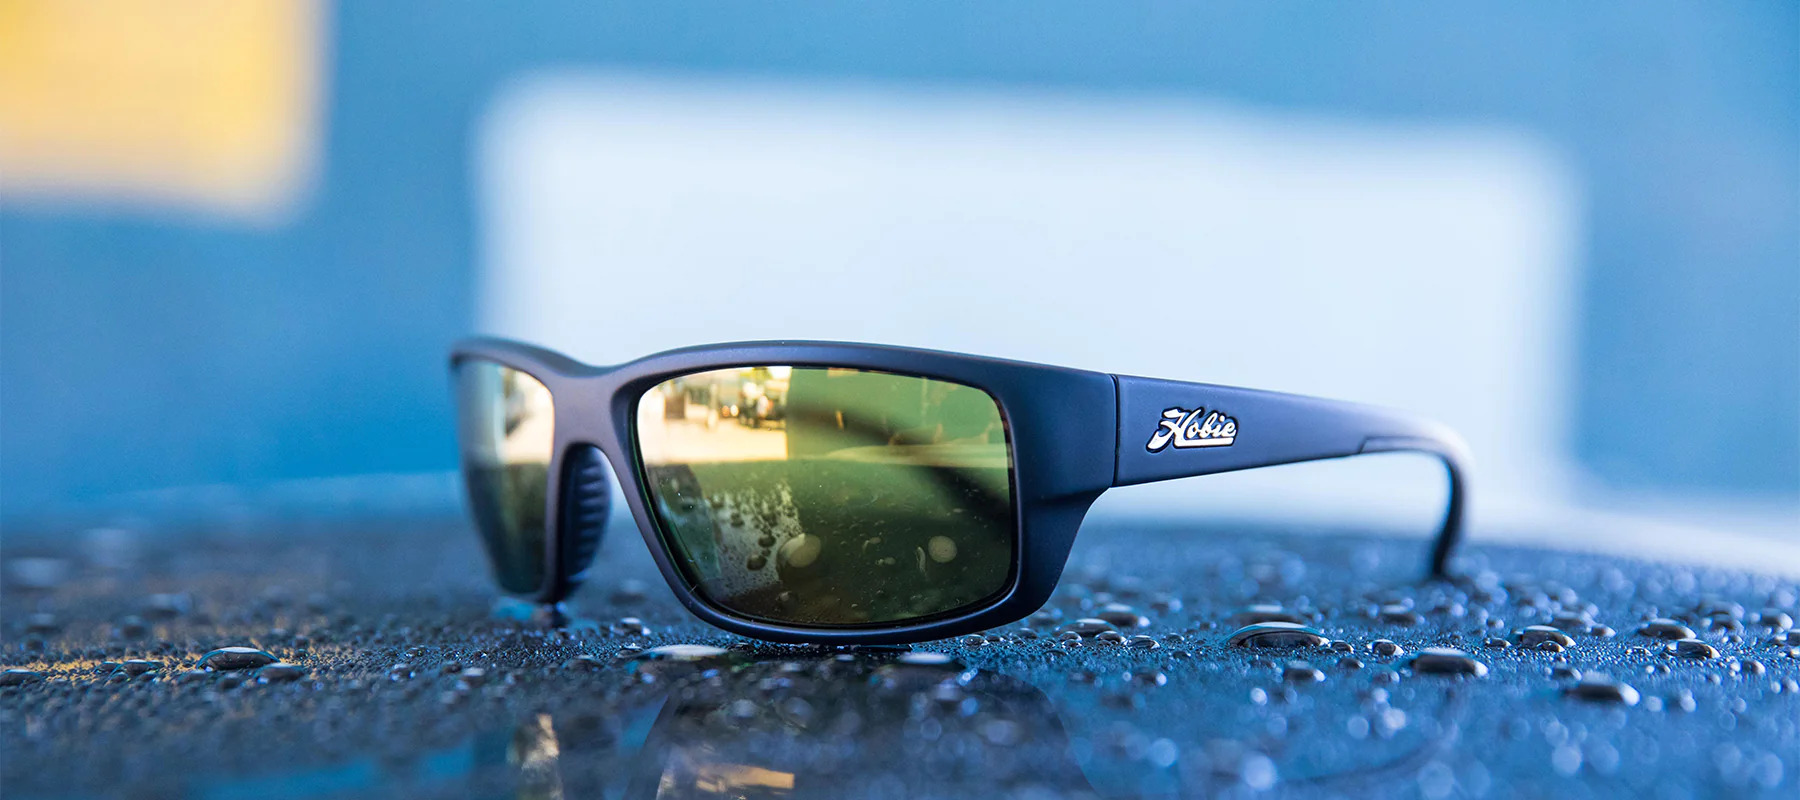 Hobie Eyewear Snook fishing sunglasses on a surface with water droplets